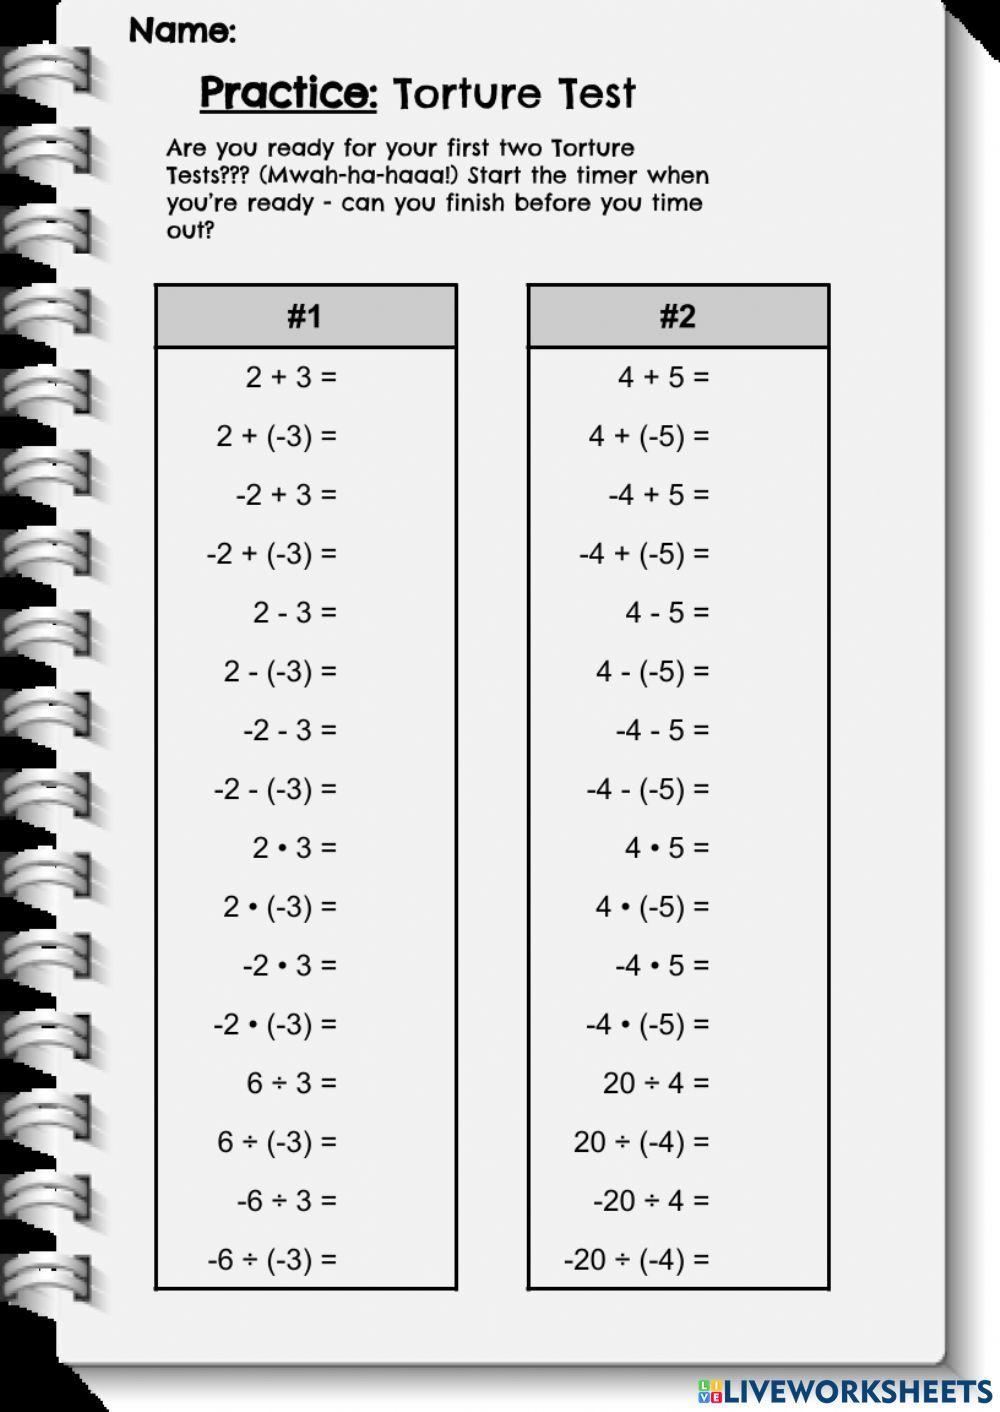 Practice: All Operations on Integers (Torture Test)